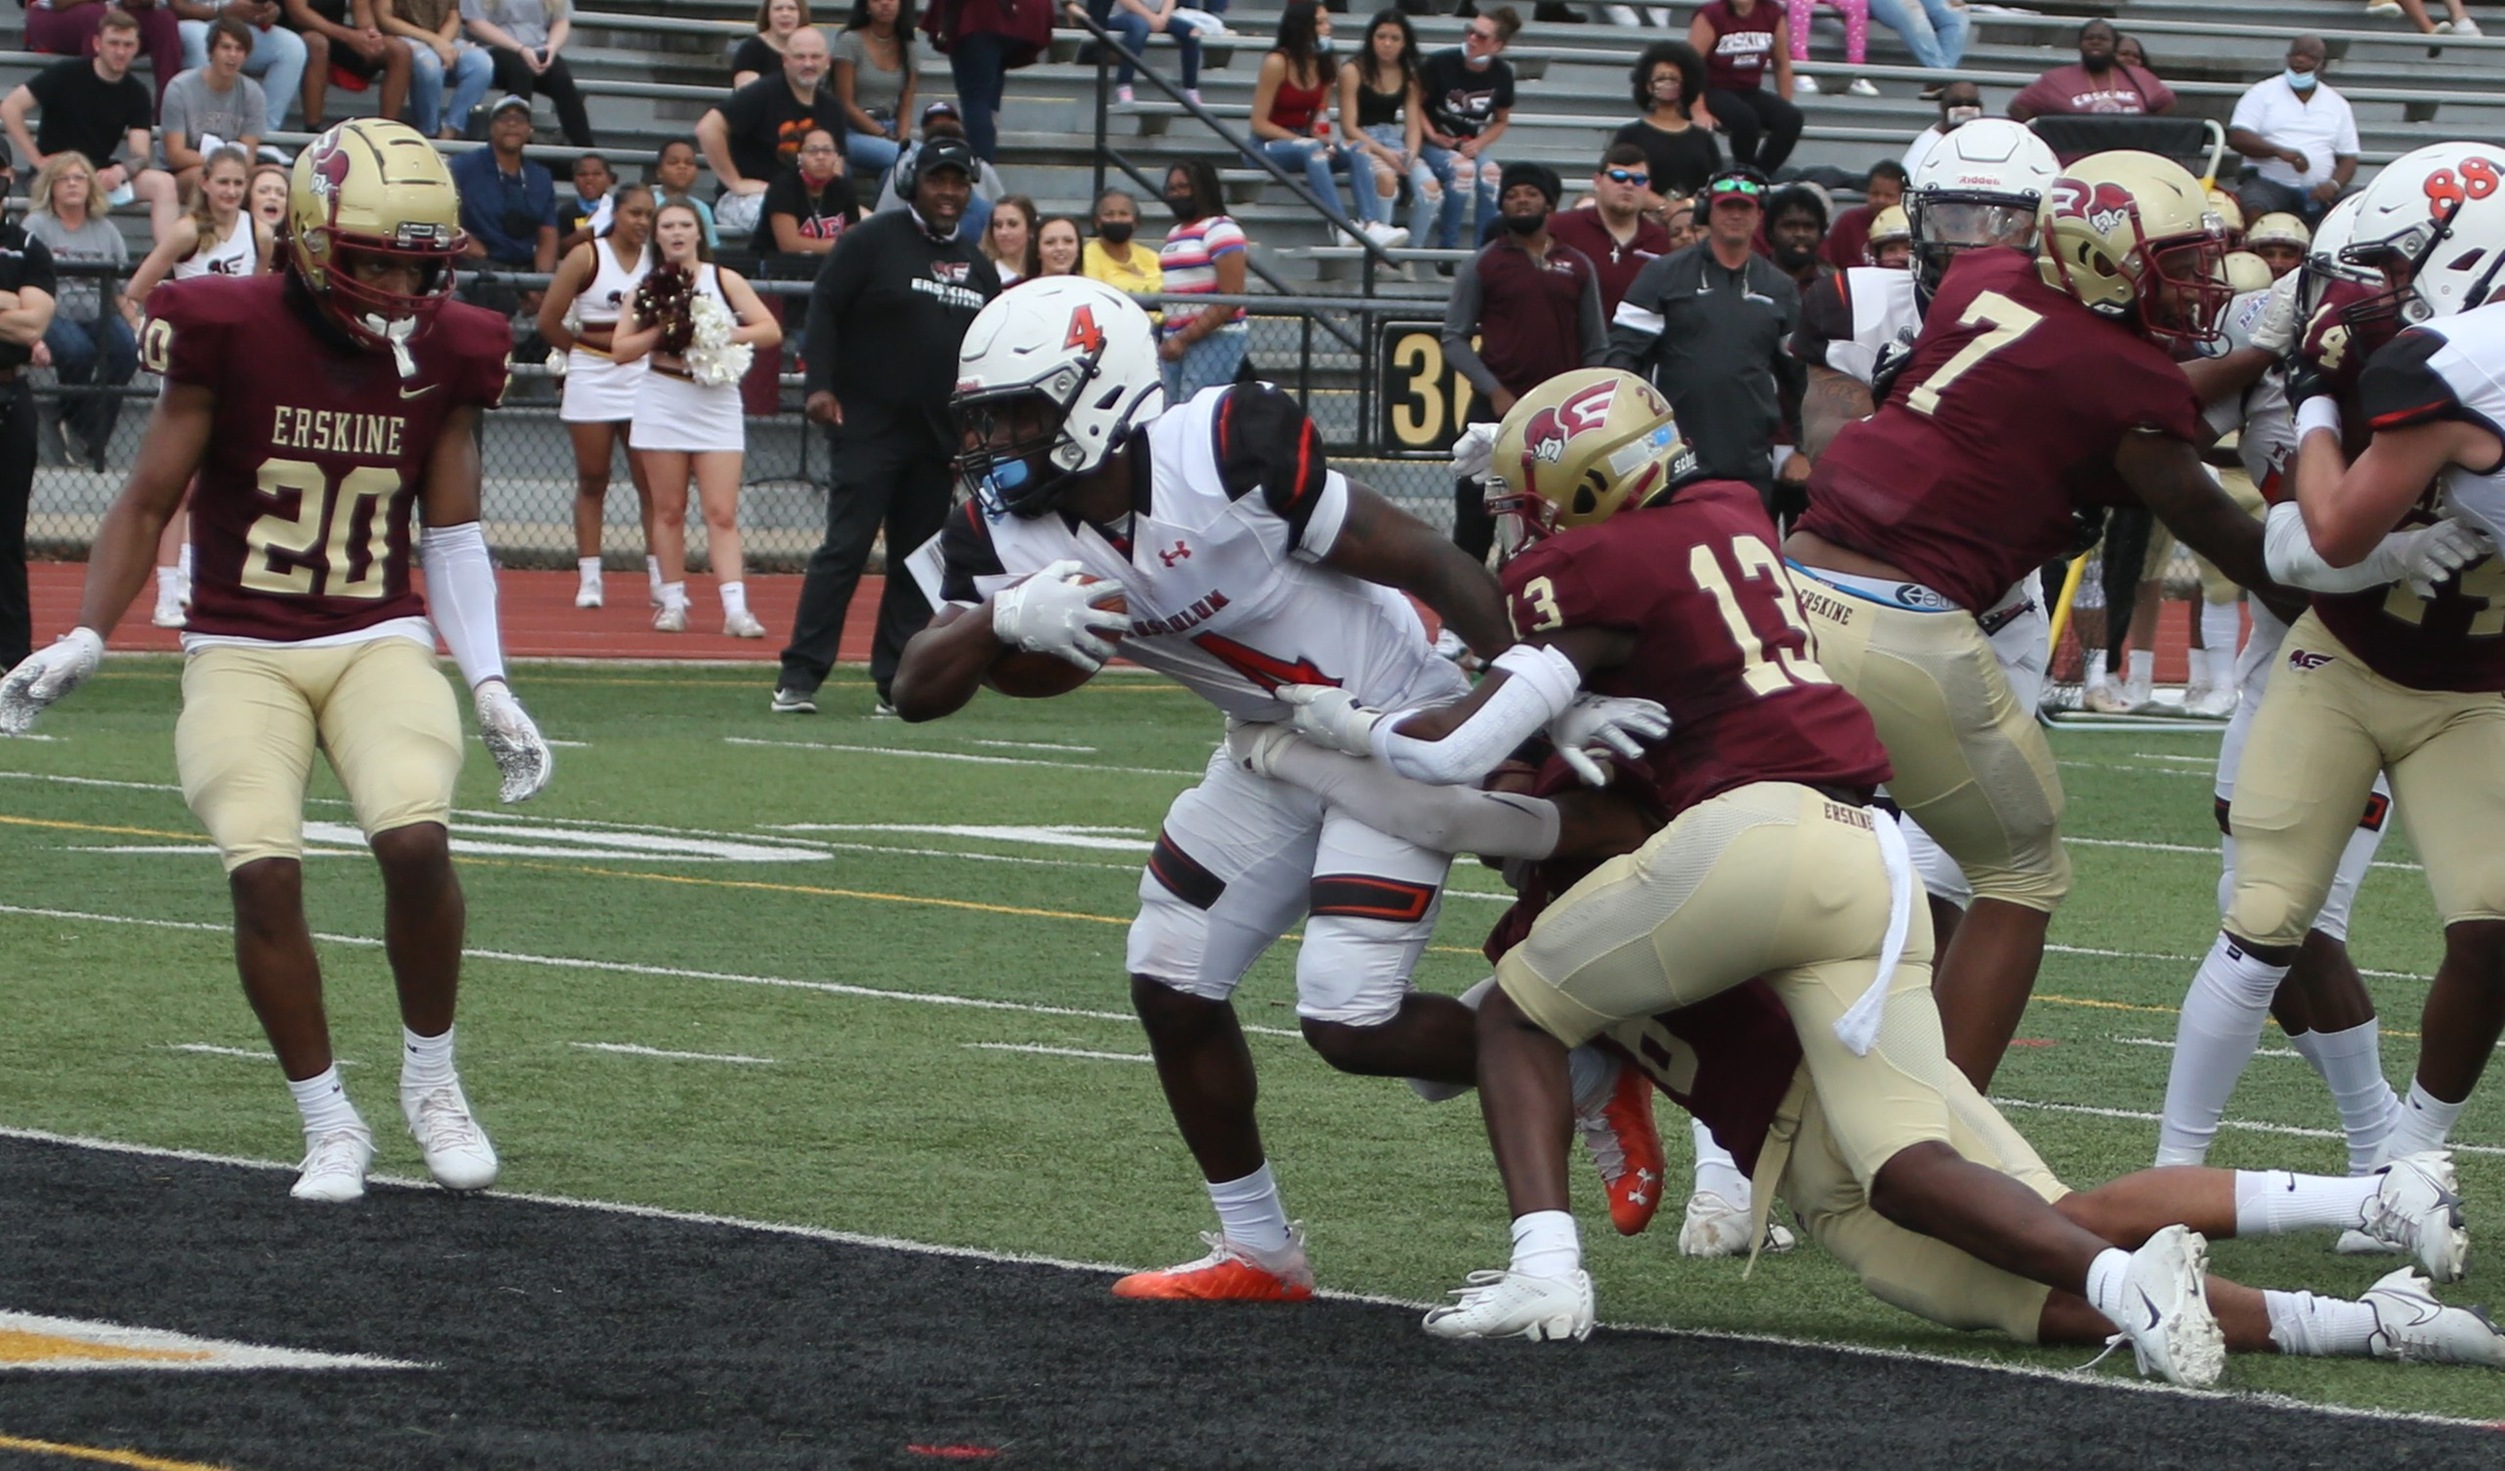 TJ Jones breaks the plane for one of his three touchdowns against Erskine